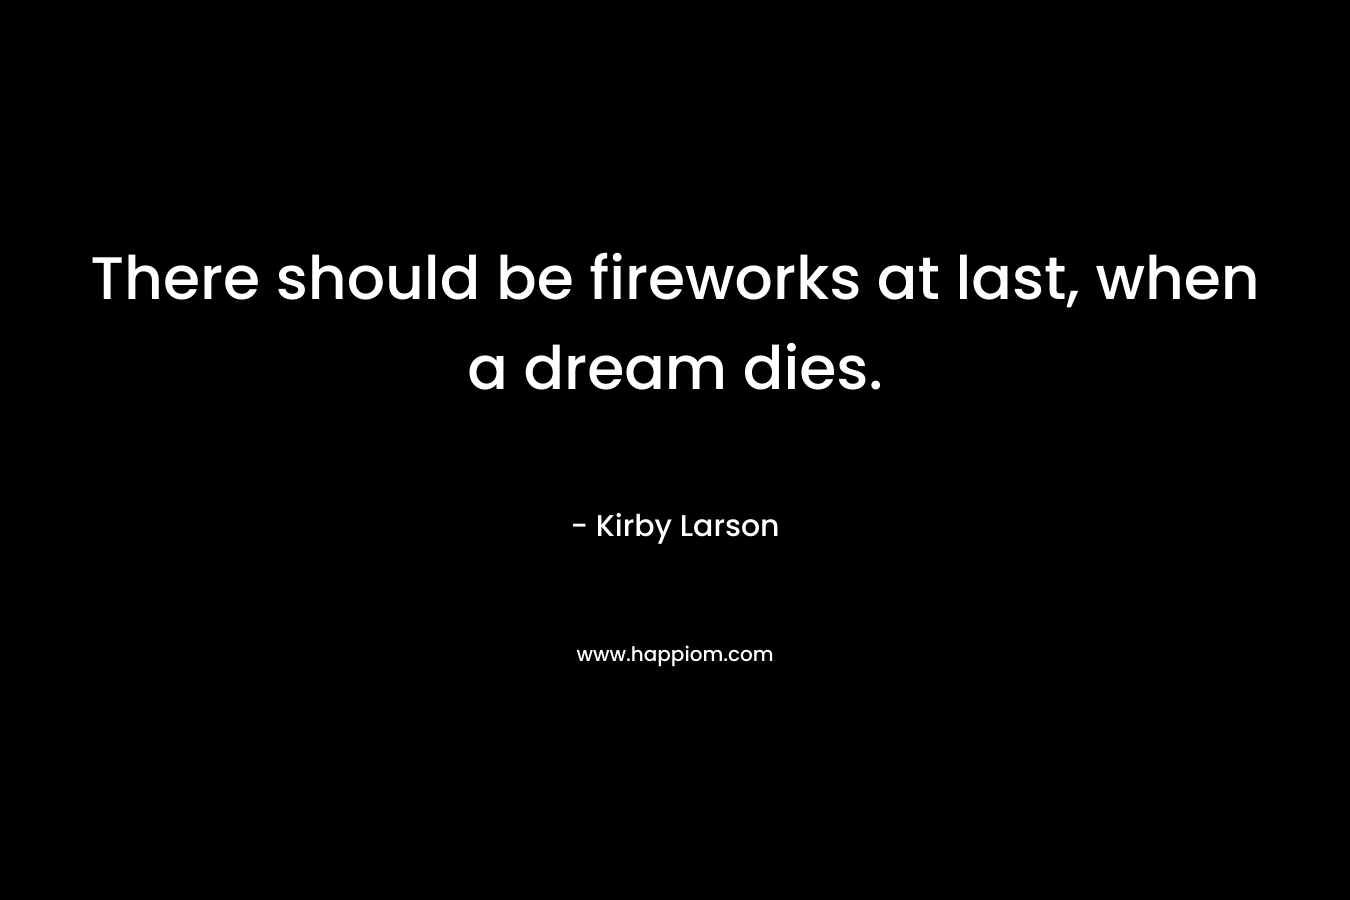 There should be fireworks at last, when a dream dies.